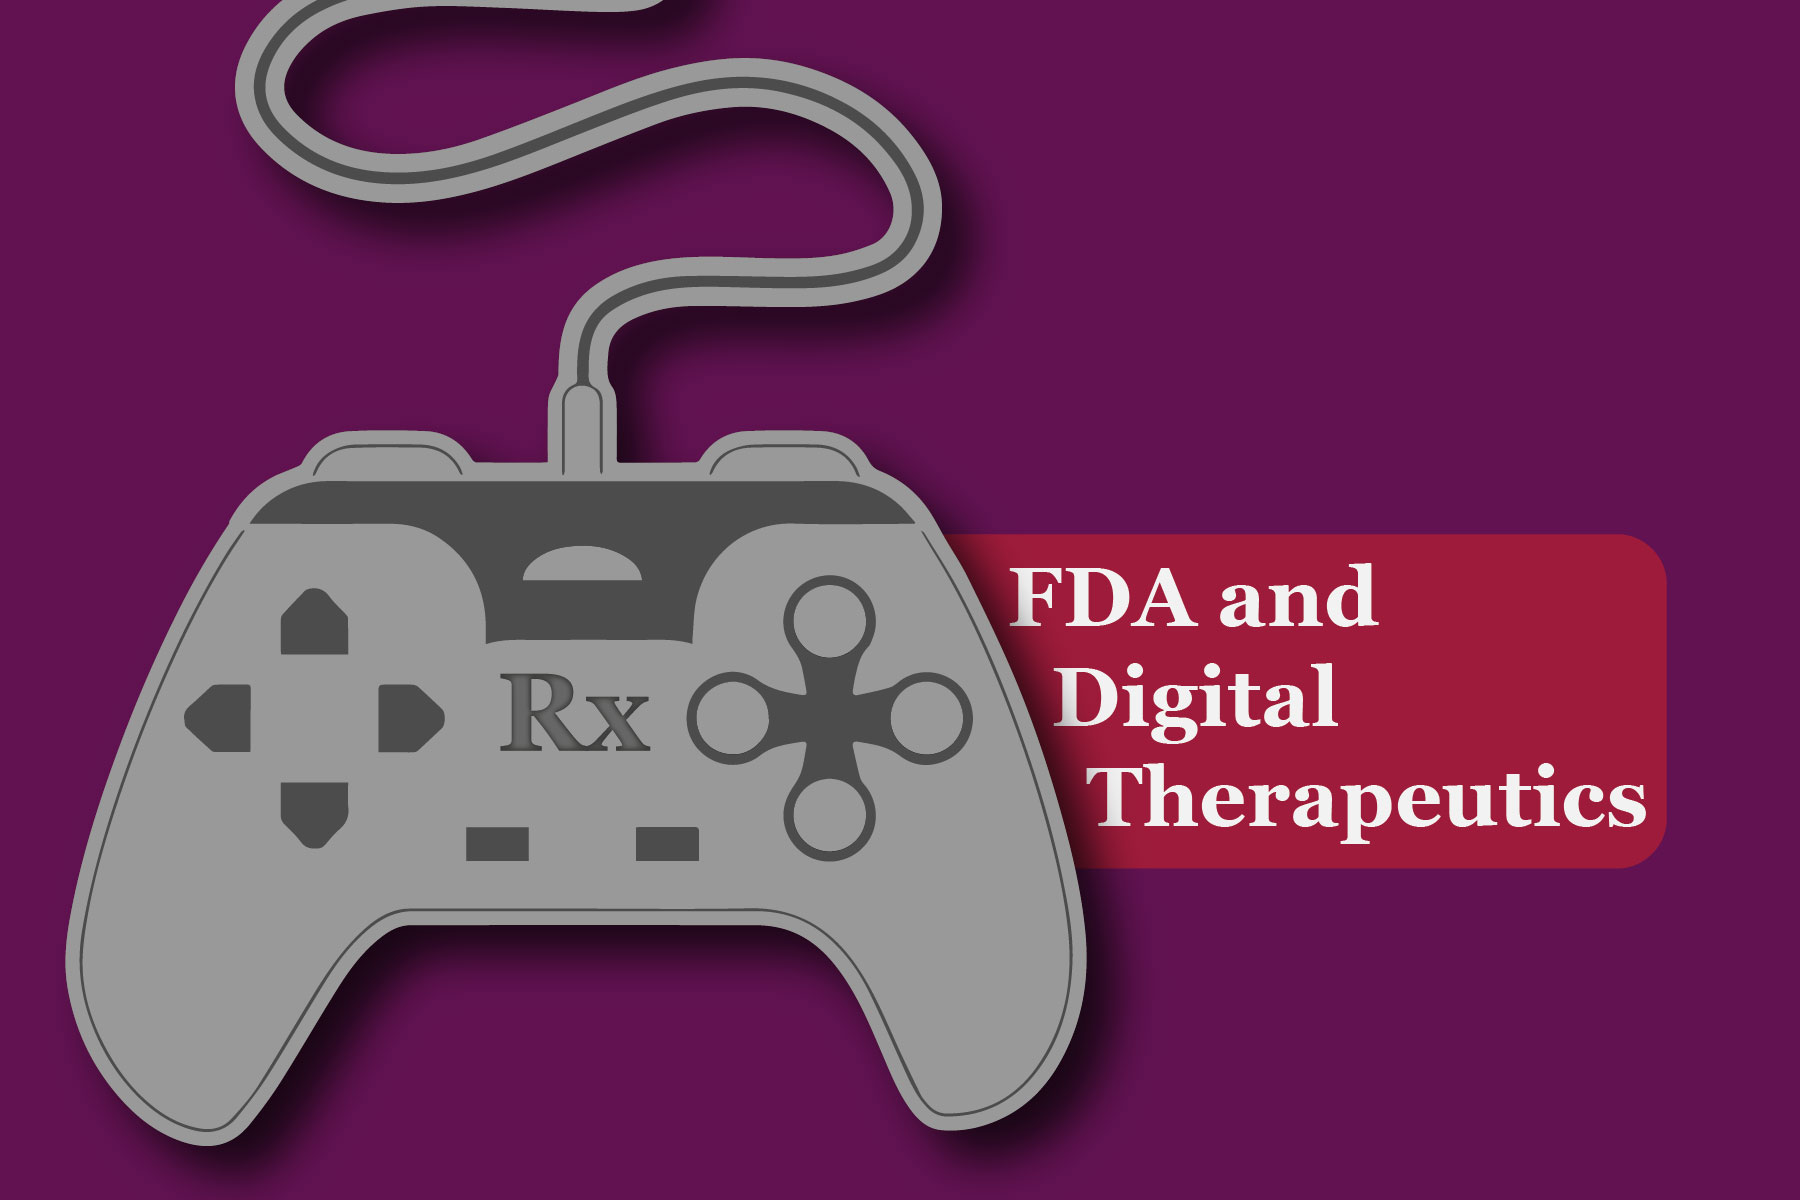 Video game controller for FDA digital therapeutics as a medical device